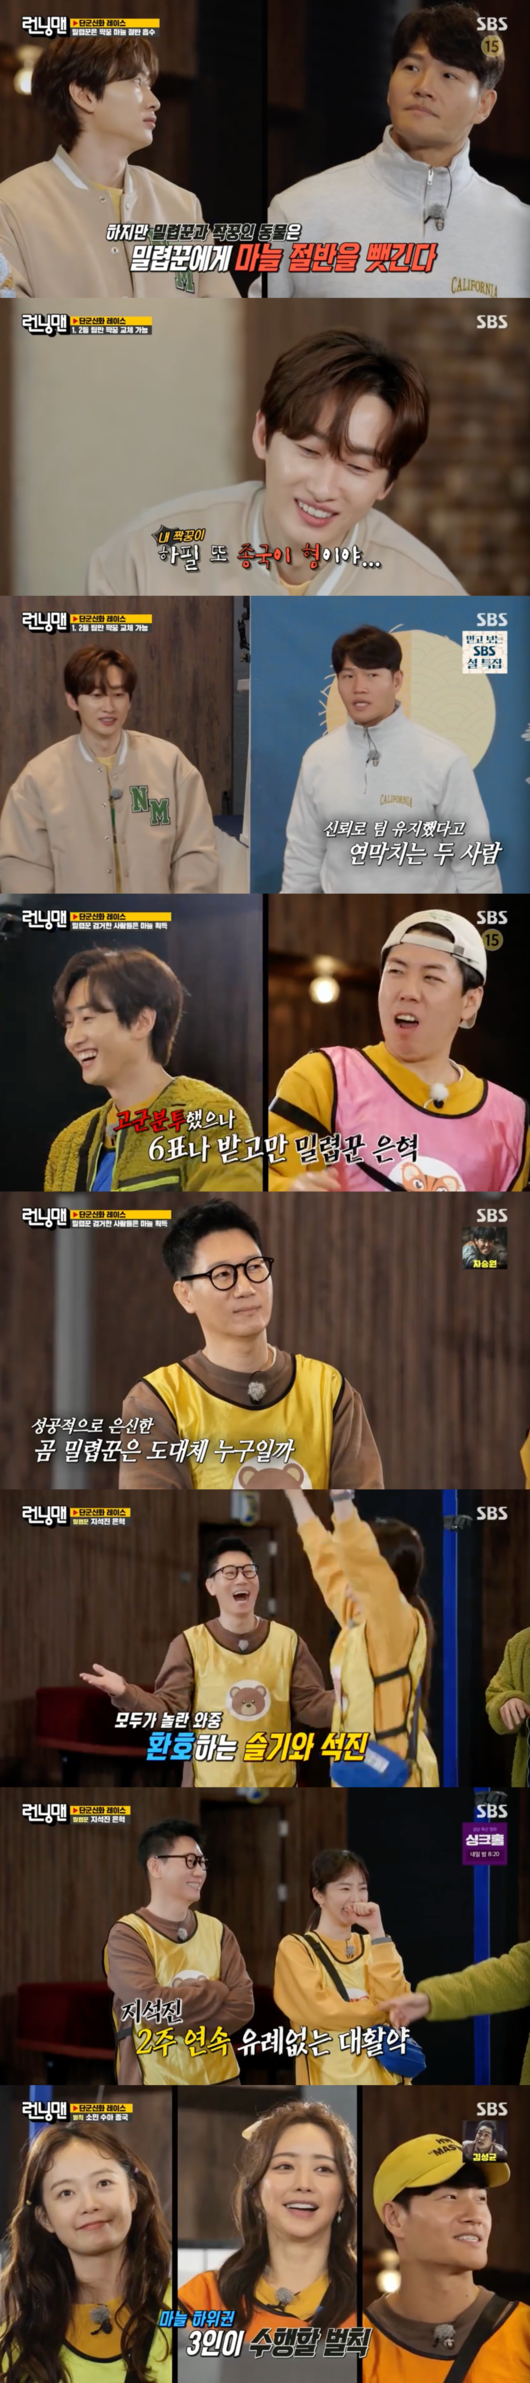 Ji Suk-jin, who met his partner well, made an unexpected big run, while Kim Jong-kook finished last with a long-time mishap.On SBS Running Man broadcast on the 30th, five tigers and five bears paired up to perform the Dangun myth Race.The team was divided into two groups: Yoo Jae-Suk - Jeon So-min, Eunhyuk - Kim Jong-kook, Haha - Yang Se-chan, Ji Suk-jin - Bae Seul-Ki, Song Ji-hyo - Hong Soo-Ah, among which the poacher who hid his identity took half of the garlic obtained by his partner.Ji Suk-jin - Bae Seul-Ki, who won first place in the first running machine race match, said they would not change the team after confirming whether each other were poachers.Second-placed Kim Jong-kook won the scissors rocks and found out his partner, Unhyuk, was a tiger poacher.But he protected Eunhyuk, and at the last minute he planned to find out both poachers and take garlic for himself.But it turns out that Ji Suk-jin and Bae Seul-Ki were the same operations: Ji Suk-jin was a poacher among bear members.But Kim Jong-kook doubted Haha until the end and the other members doubted Kim Jong-kook.They earned garlic through missions and tried to find poachers by changing partners; as a result, Eunhyuk and Kim Jong-kook were the most suspected.Sure enough, the tiger poacher turned out to be Unhyuk. Now the only thing left was a bear poacher.Everyone suspected Kim Jong-kook and Haha, but unexpectedly Ji Suk-jin was the main character; the only one who hit both poachers, Bae Seul-Ki, called the holy life alone.As Ji Suk-jin, he met his partner well and hid his identity until the end, and metallurgical garlic was also called.The final ranking was first by Eunhyuk, who took half of his partners garlic with Kim Jong-kook in the early stages.Ji Suk-jin, who kept poachers thanks to Bae Seul-Ki, came in second and Bae Seul-Ki, who played secretly, came in third.Kim Jong-kook, on the other hand, made the same operation as Bae Seul-Ki, but stayed in the final place because Haha was suspicious until the end.Kim Jong-kook and other low-ranking Jeon So-min and Hong Soo-Ah performed a mission to leave the garlic on the day.running man